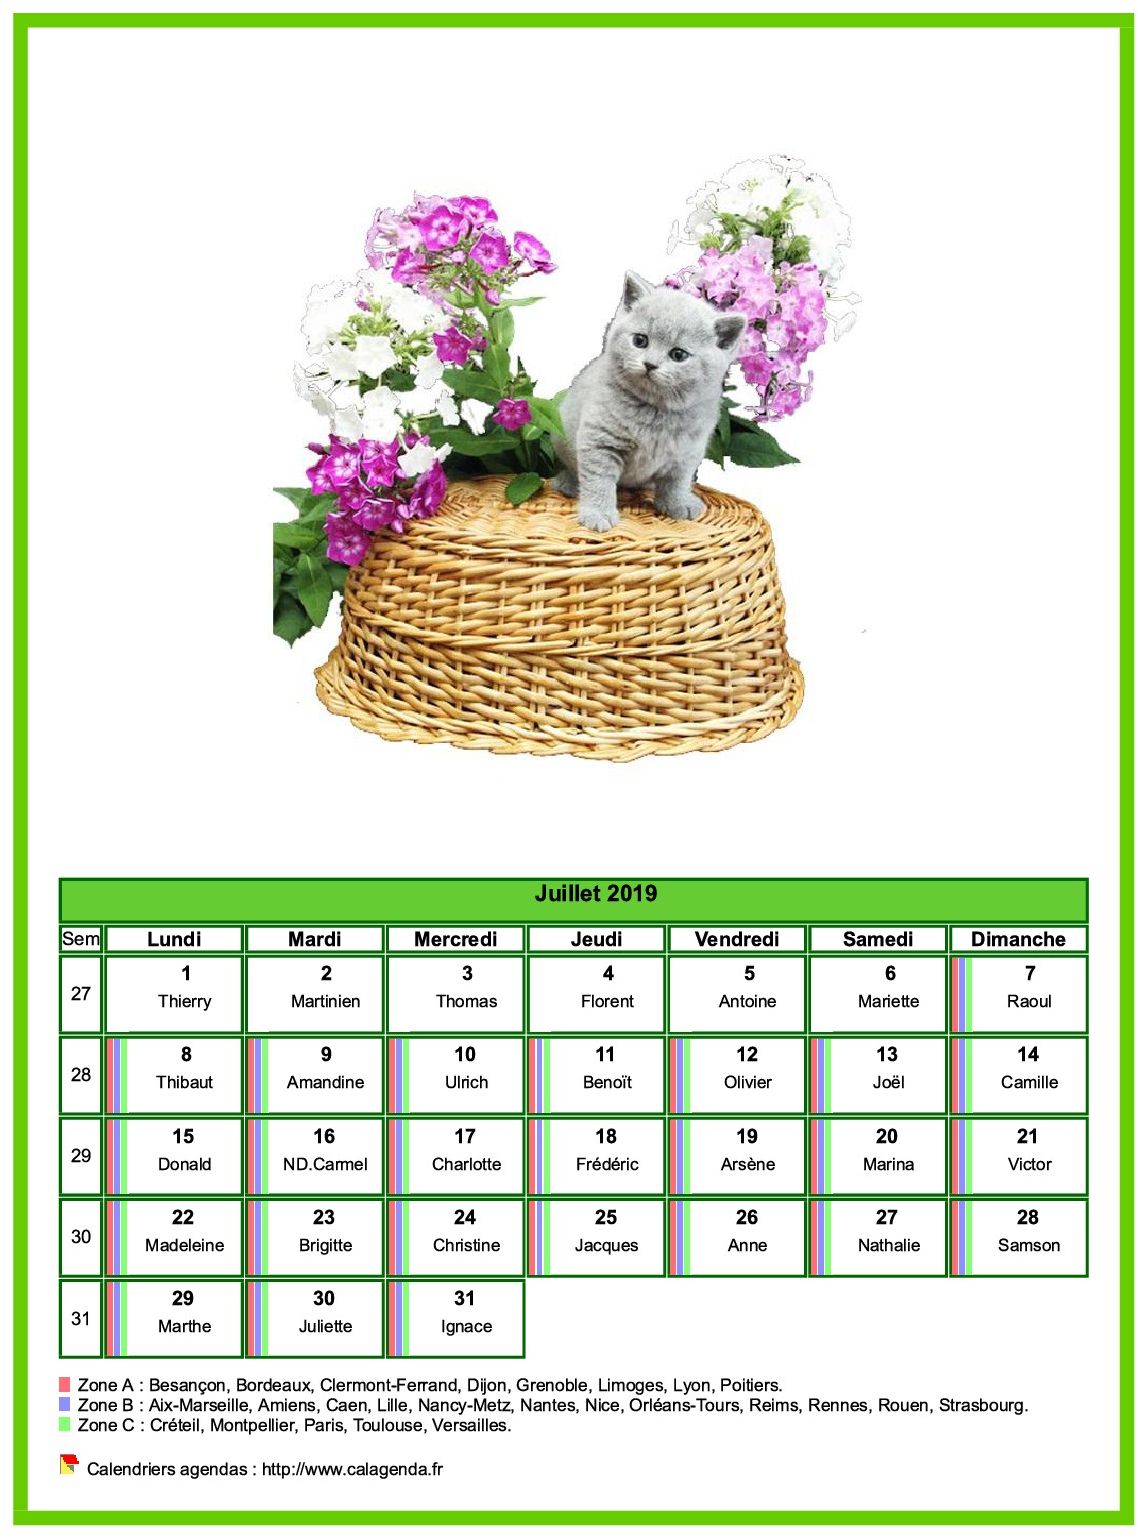 Calendrier juillet 2019 chats